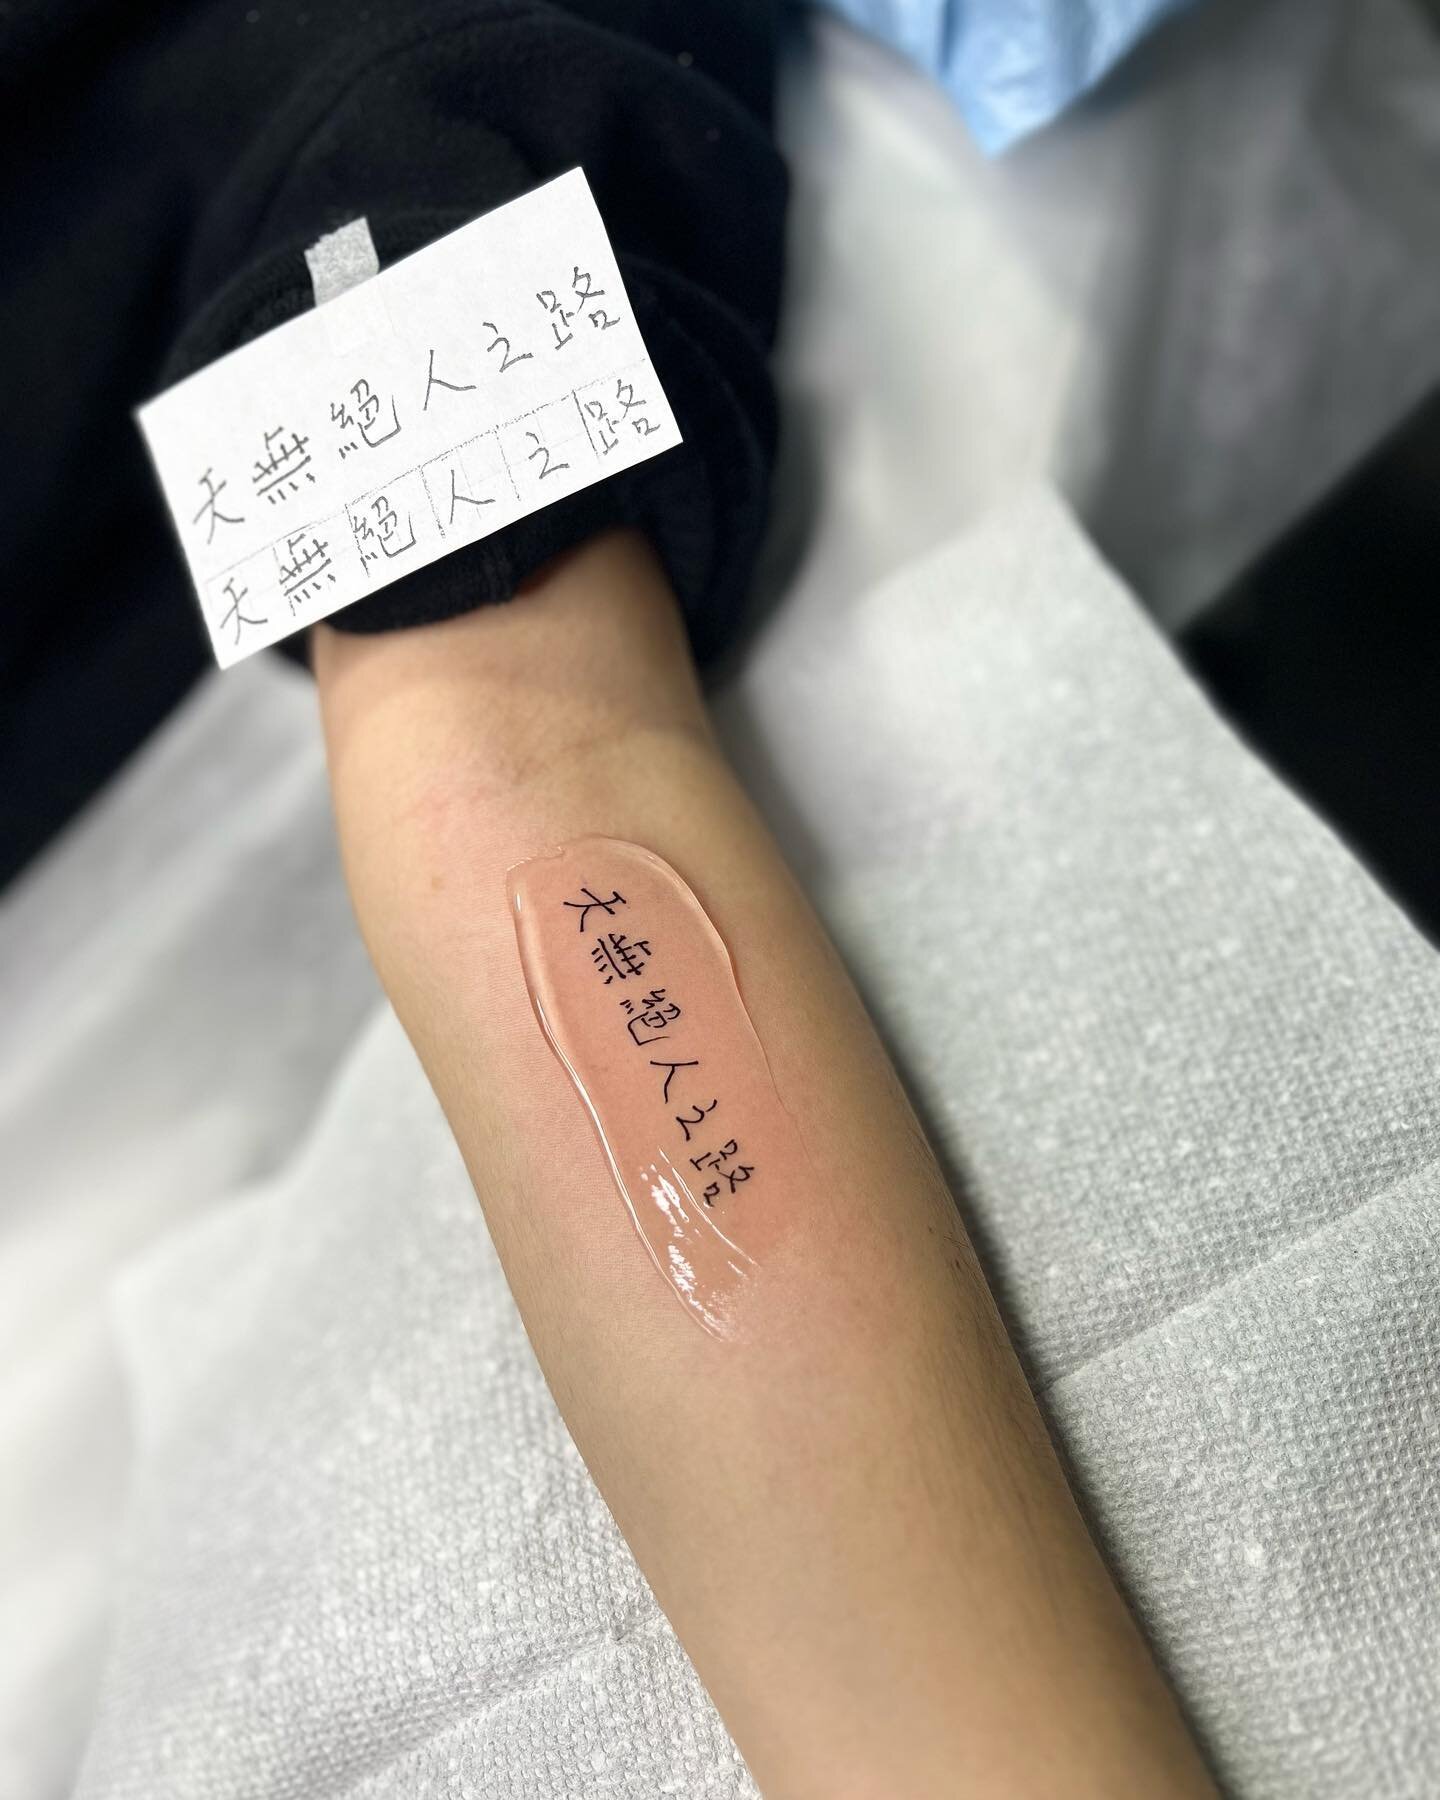 &ldquo;天无绝人之路&rdquo; handwritten by her grandma. 
It means &ldquo;there will always be a way out&rdquo;
Another meaningful piece.
#handwritingtattoo #chinesecharacters #calligraphytattoo #forearmtattoo #finelinetattoo #nyctattoo #nyctattooartist #fem